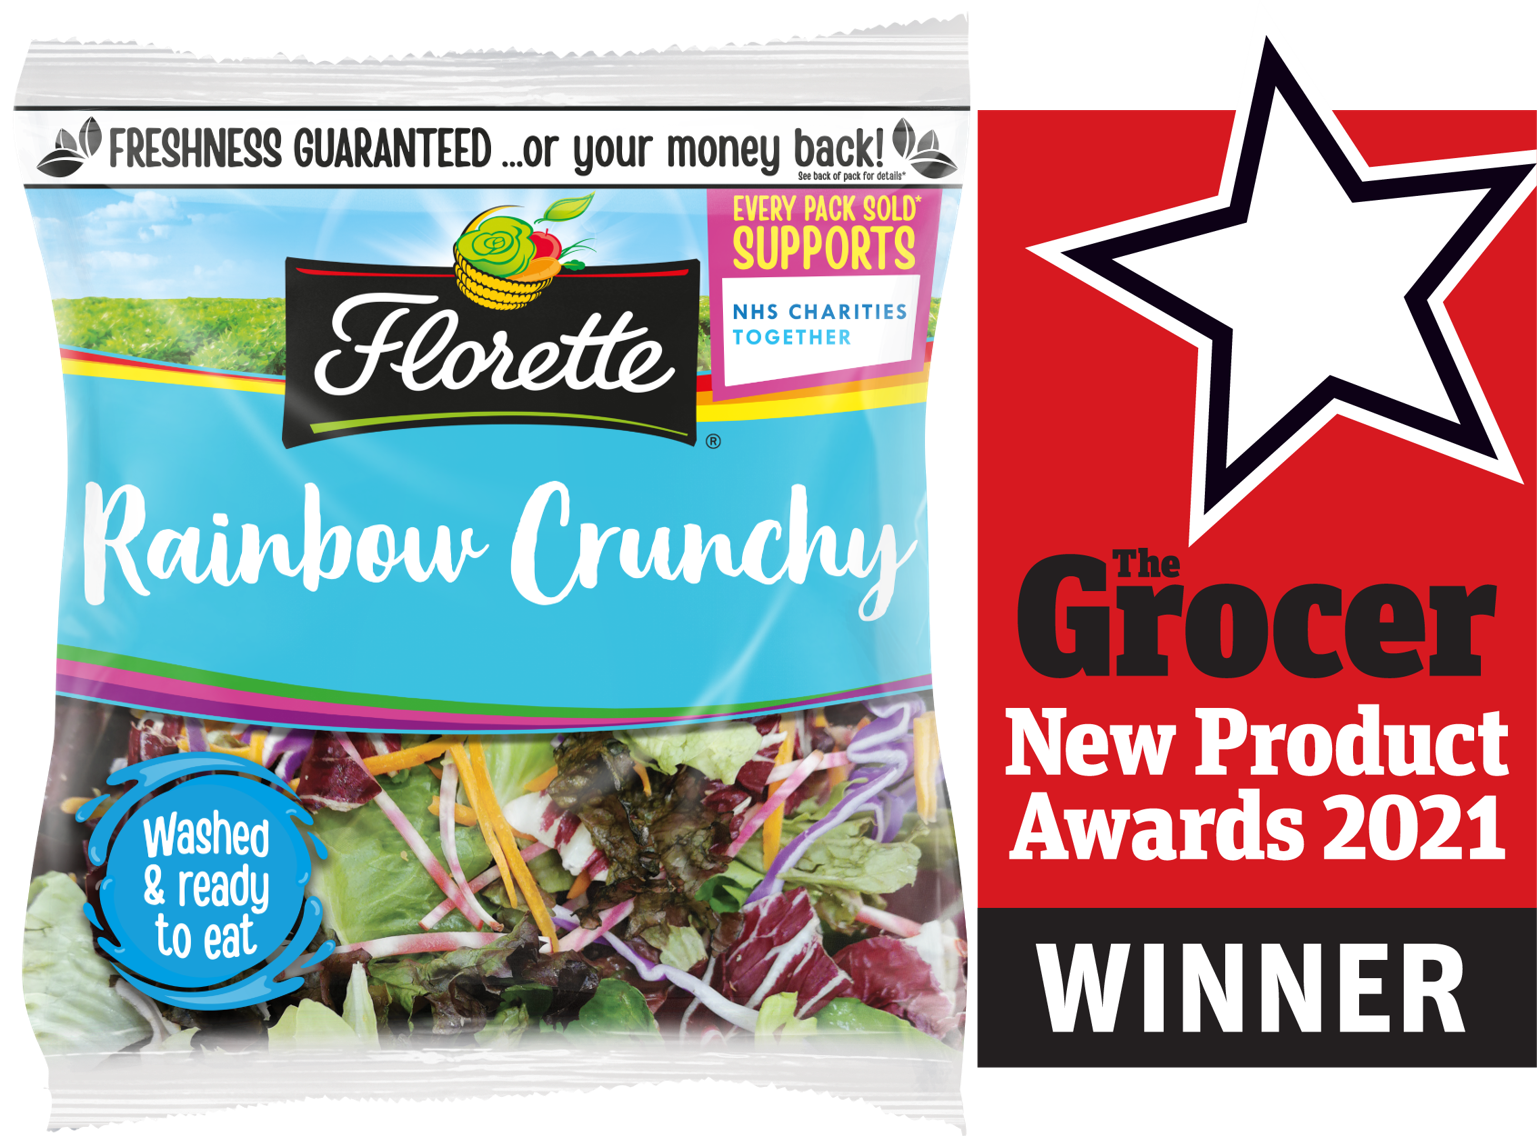 Rainbow Crunchy wins The Grocer’s New Product Awards 2021: Fresh Food category!